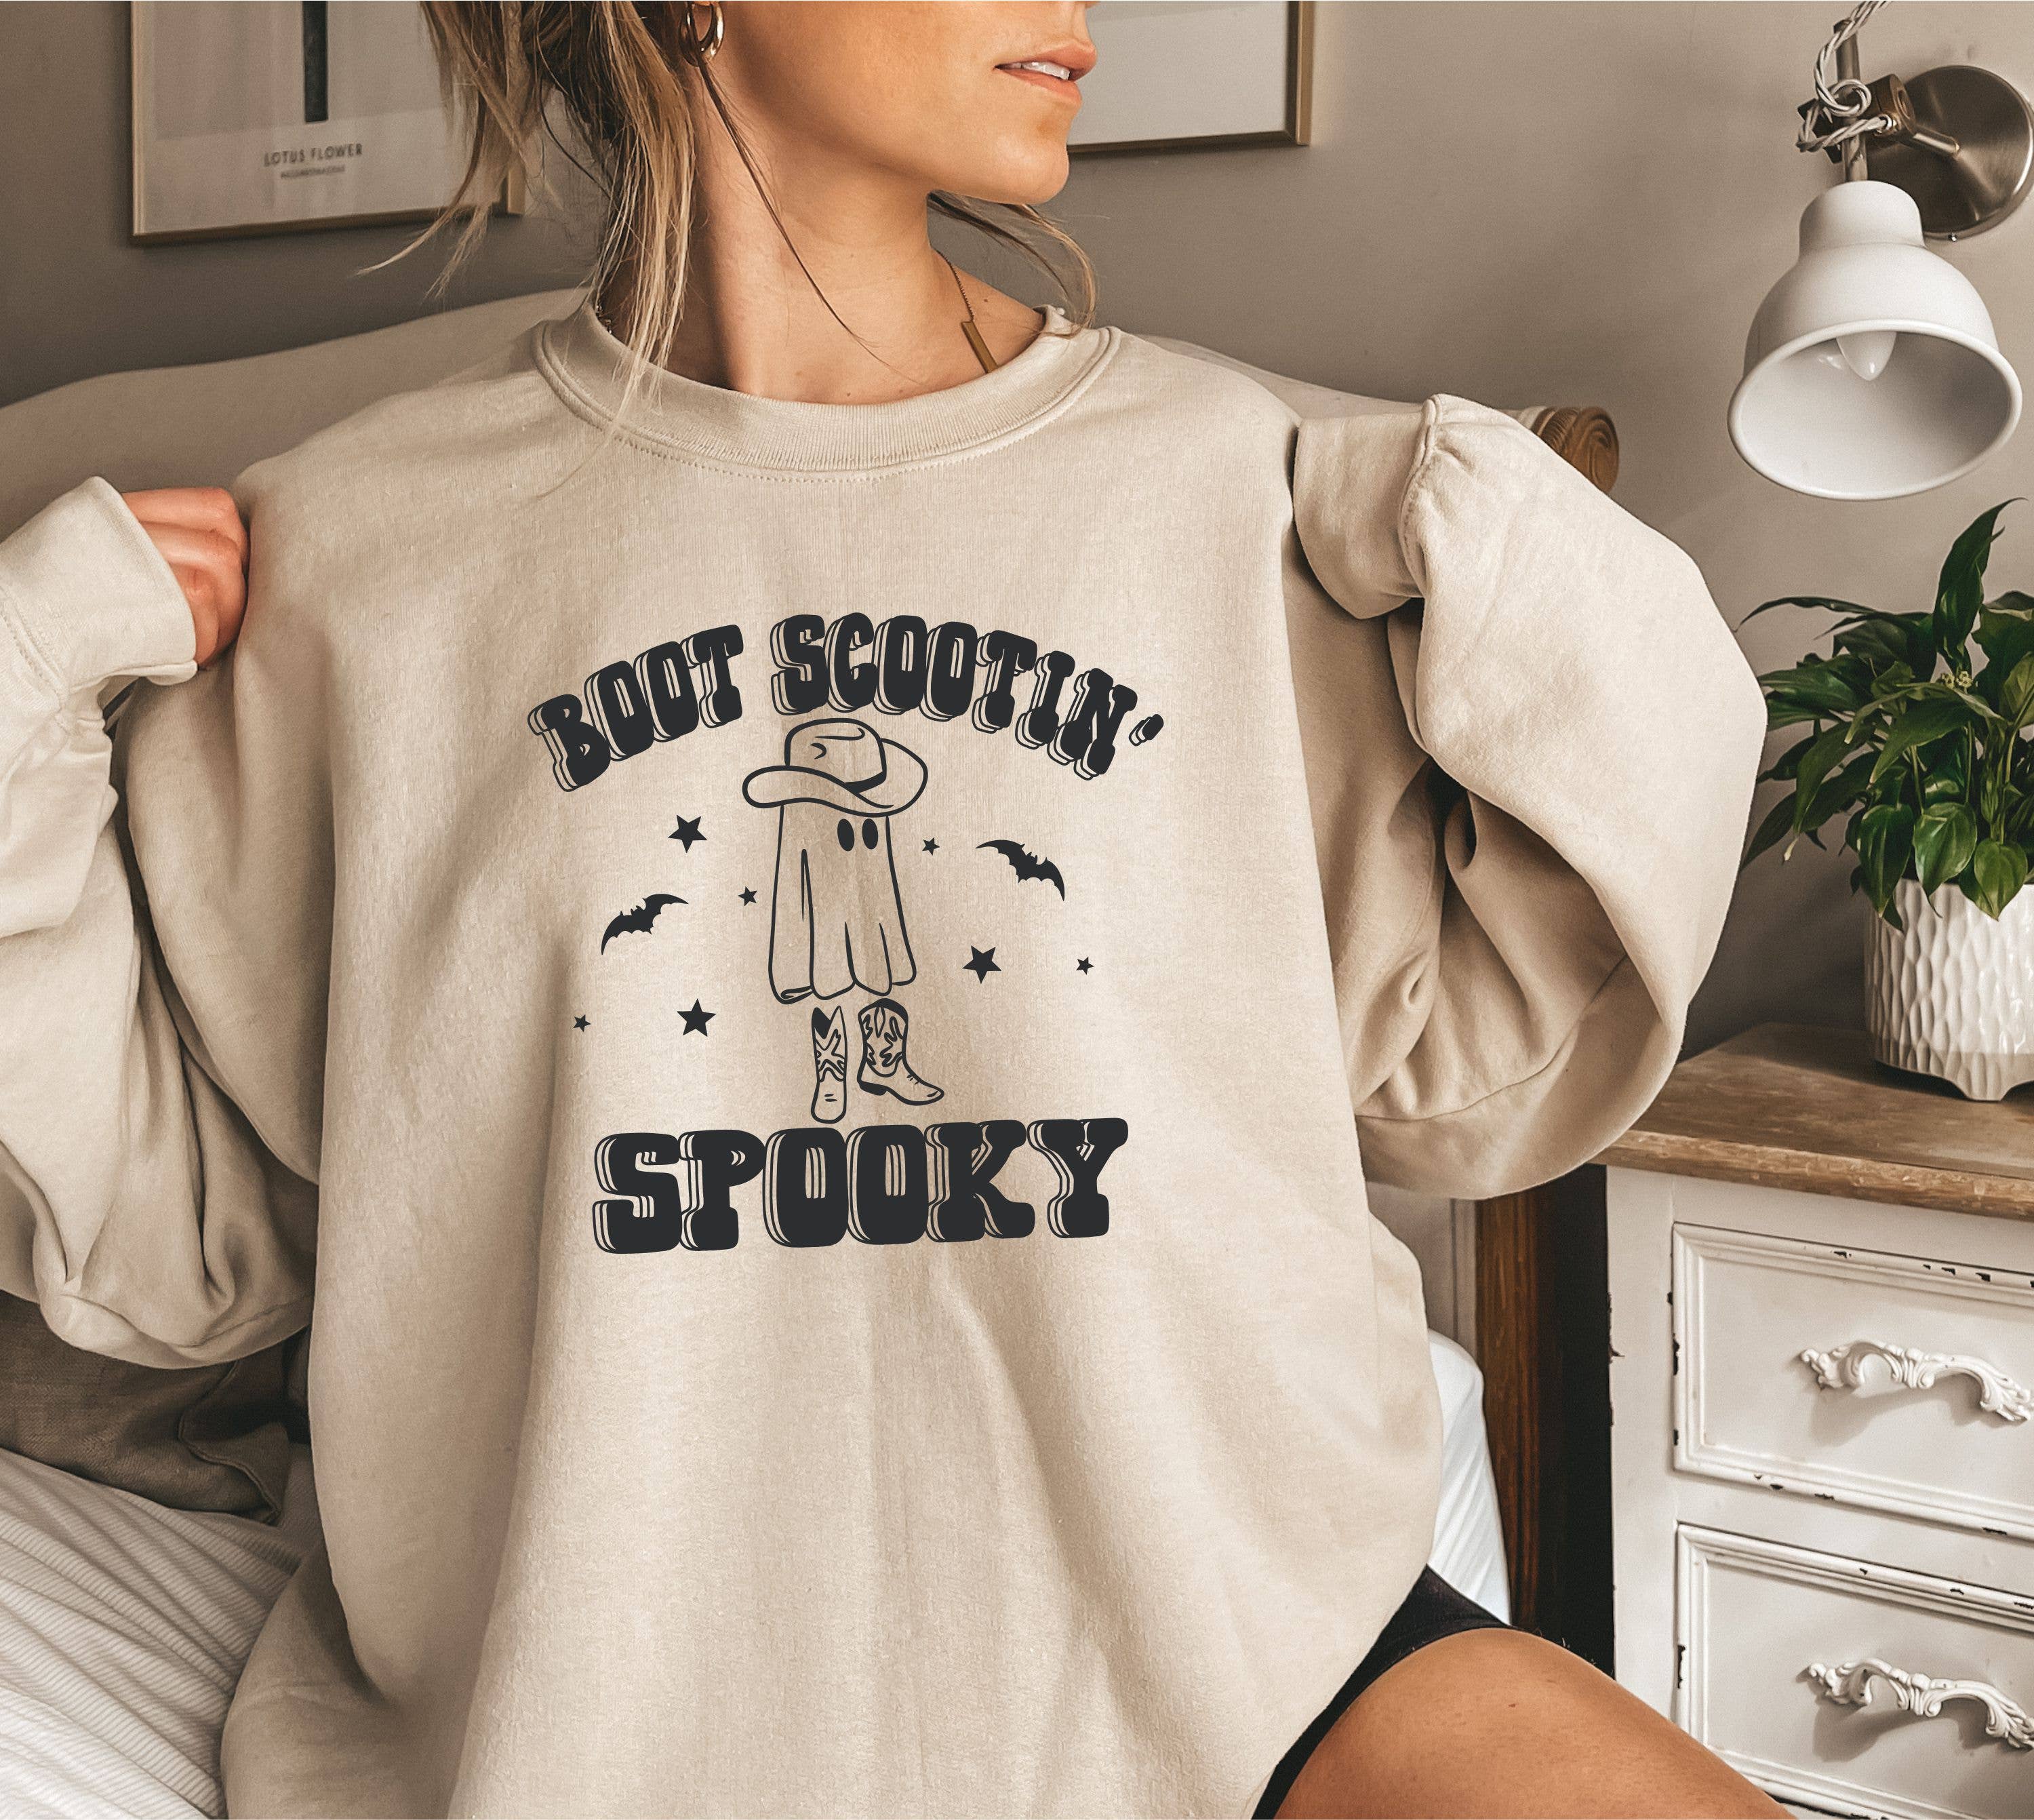 Stay Spooky - Sublimation Sweatshirt,Halloween sublimation,H